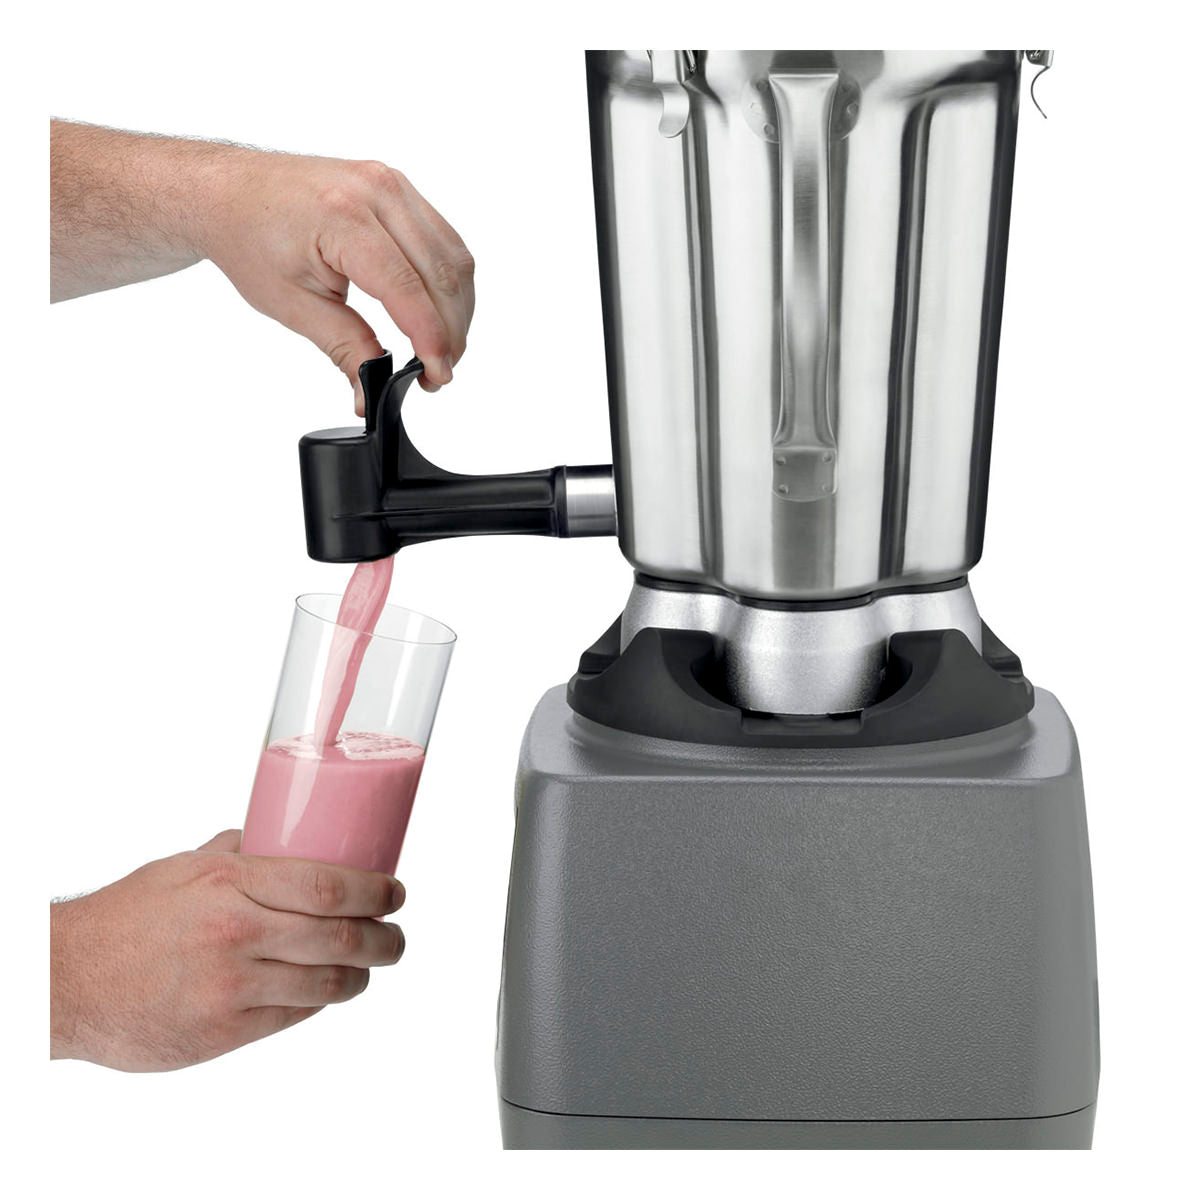 CB15SF Heavy-Duty One Gallon Food Blender with Spigot